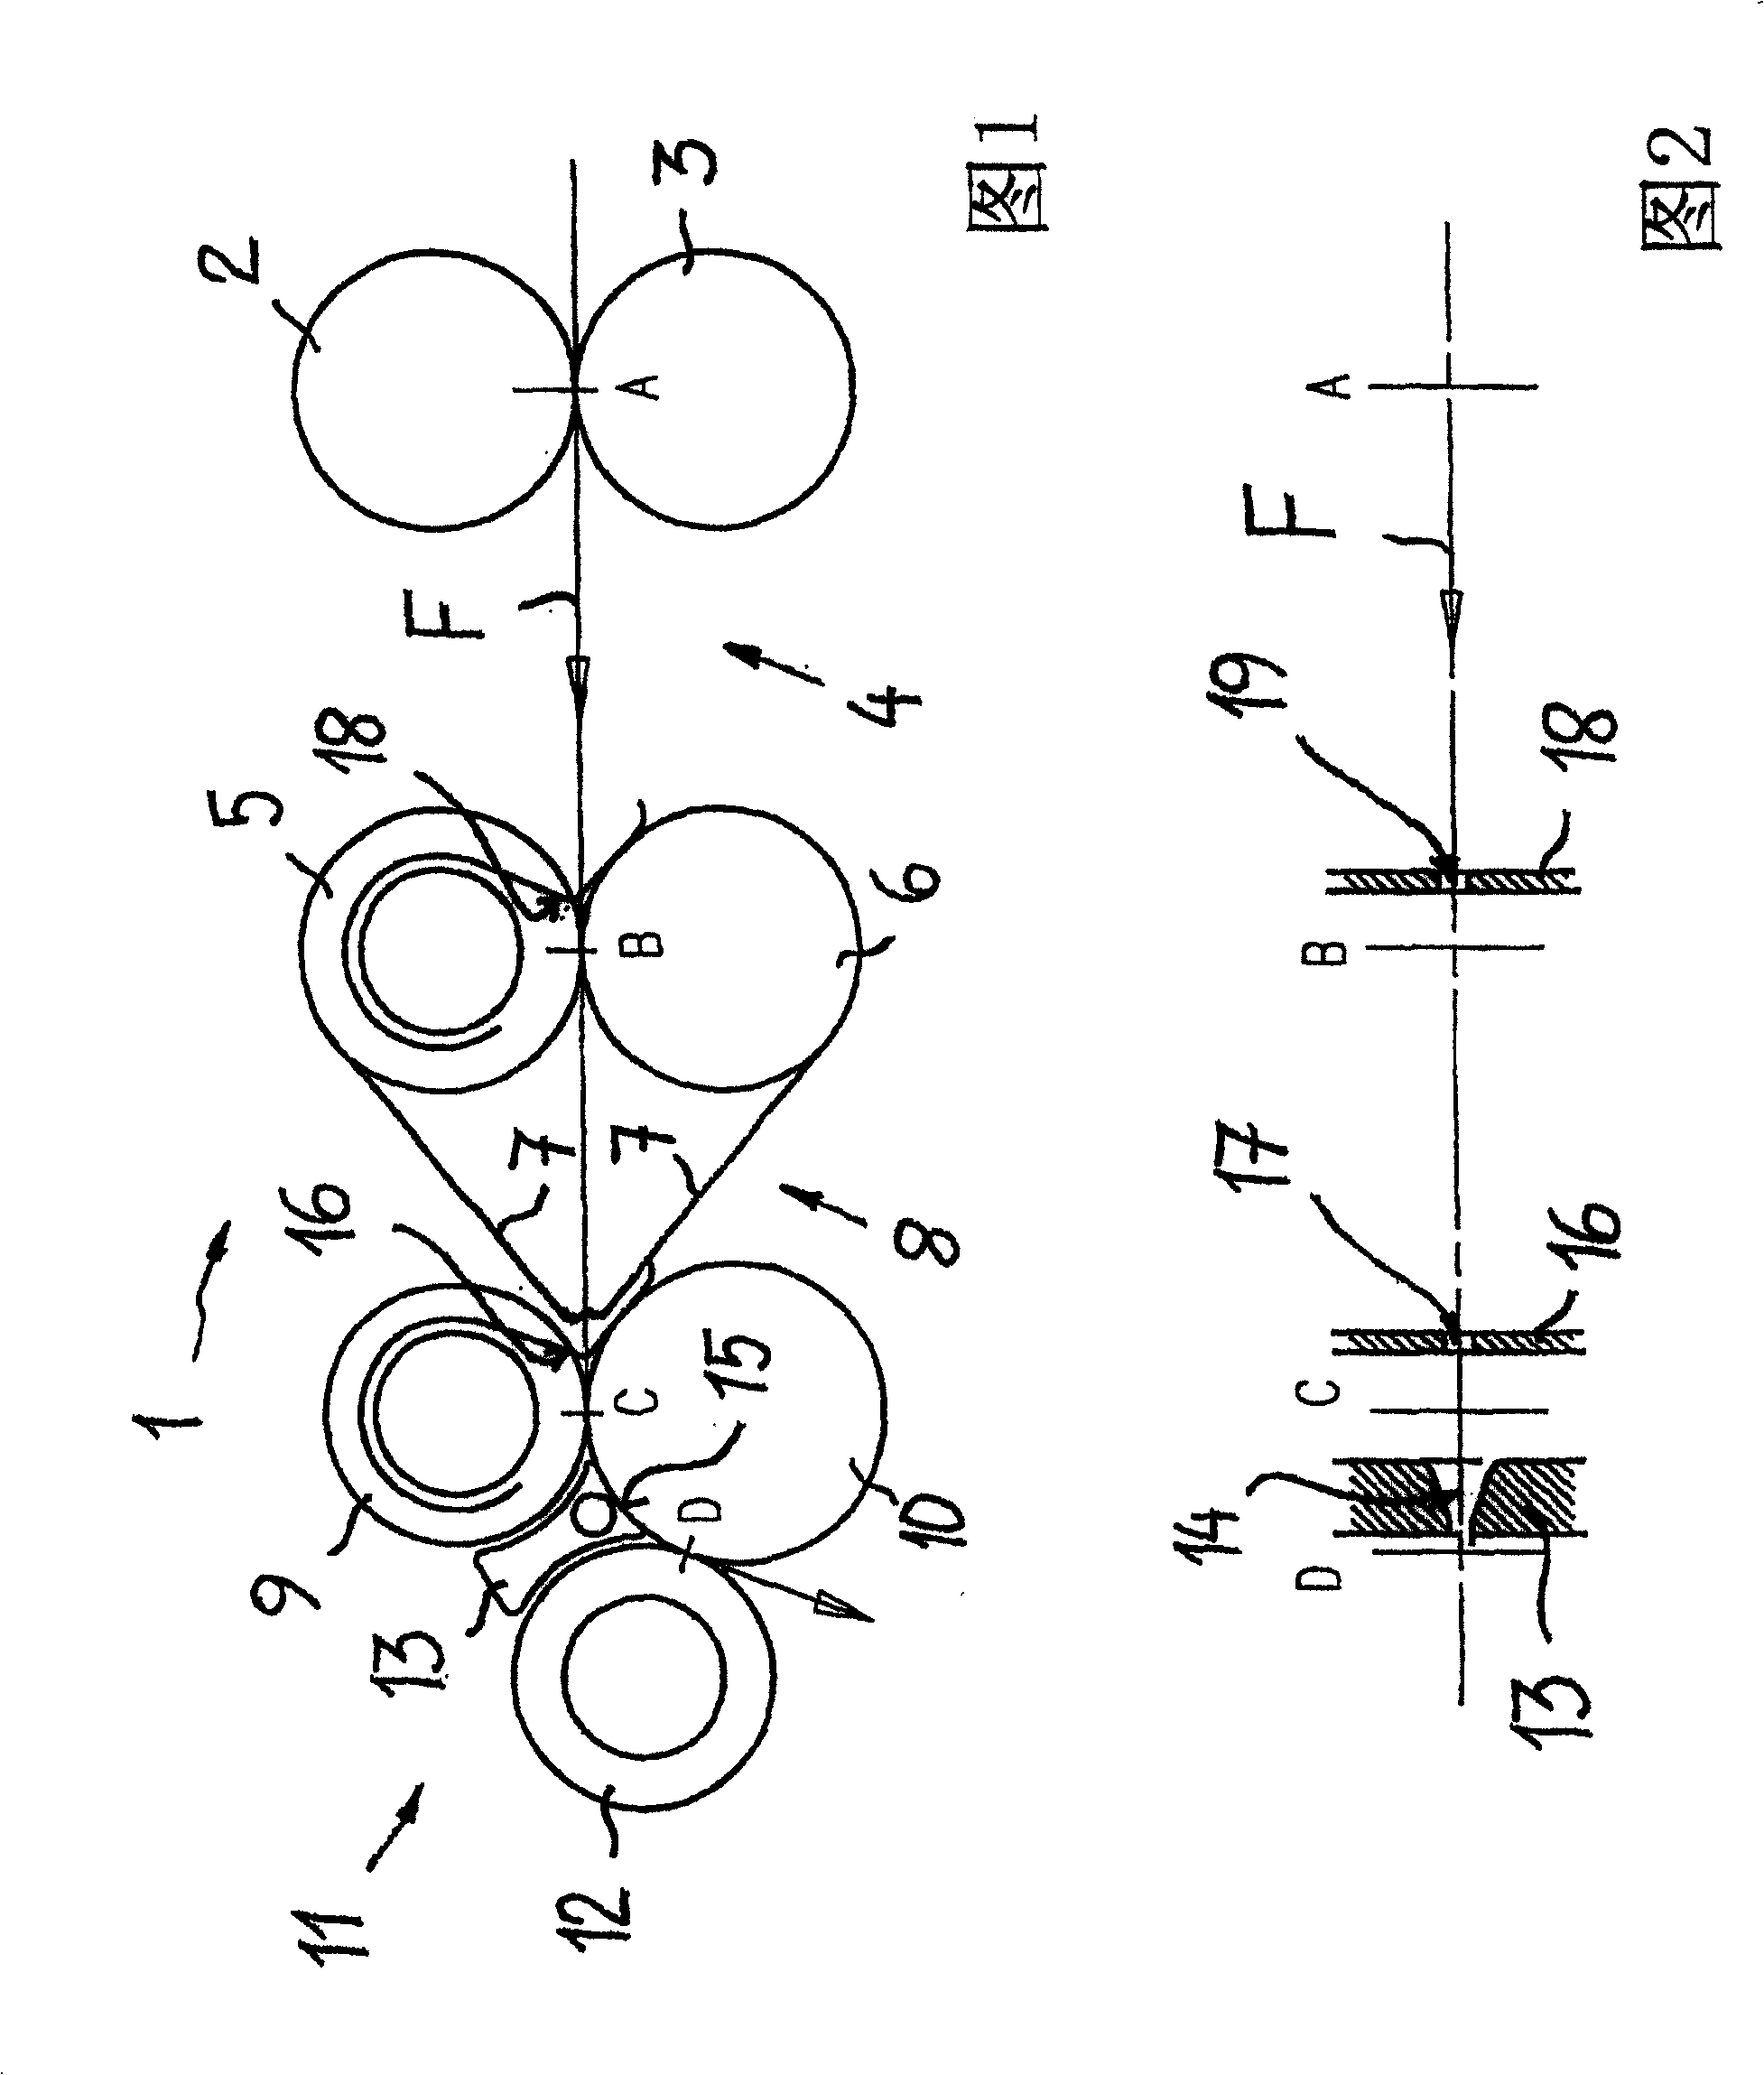 Drawing frame of a staple fibre spinning machine comprising a central fibre guide